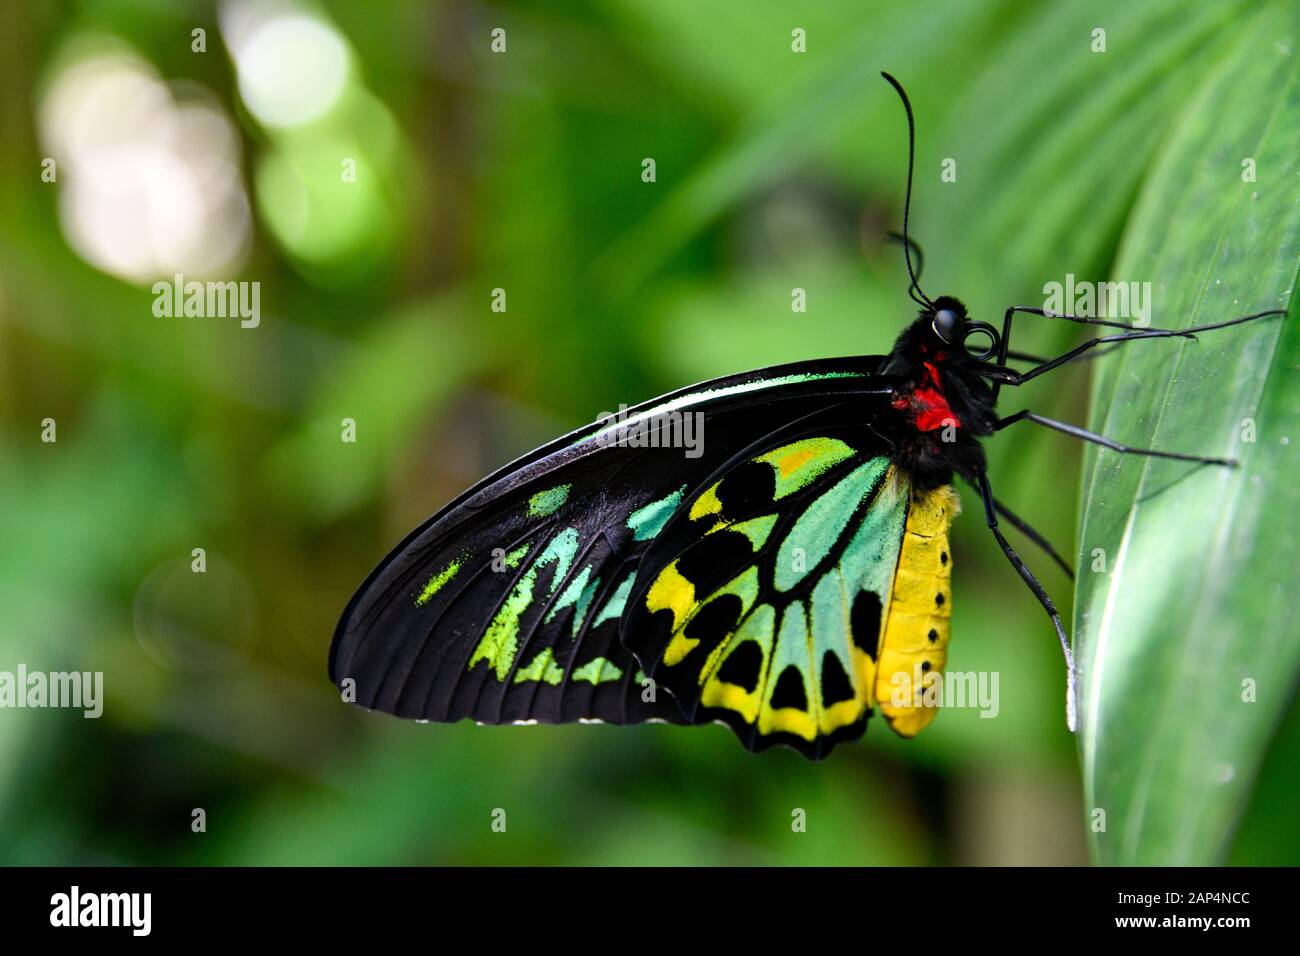 Cairns Birdwing Butterfly, Ornithoptera Euphorion - Large Beautiful Colourful Bright Tropical Australian Butterfly closeup Stock Photo